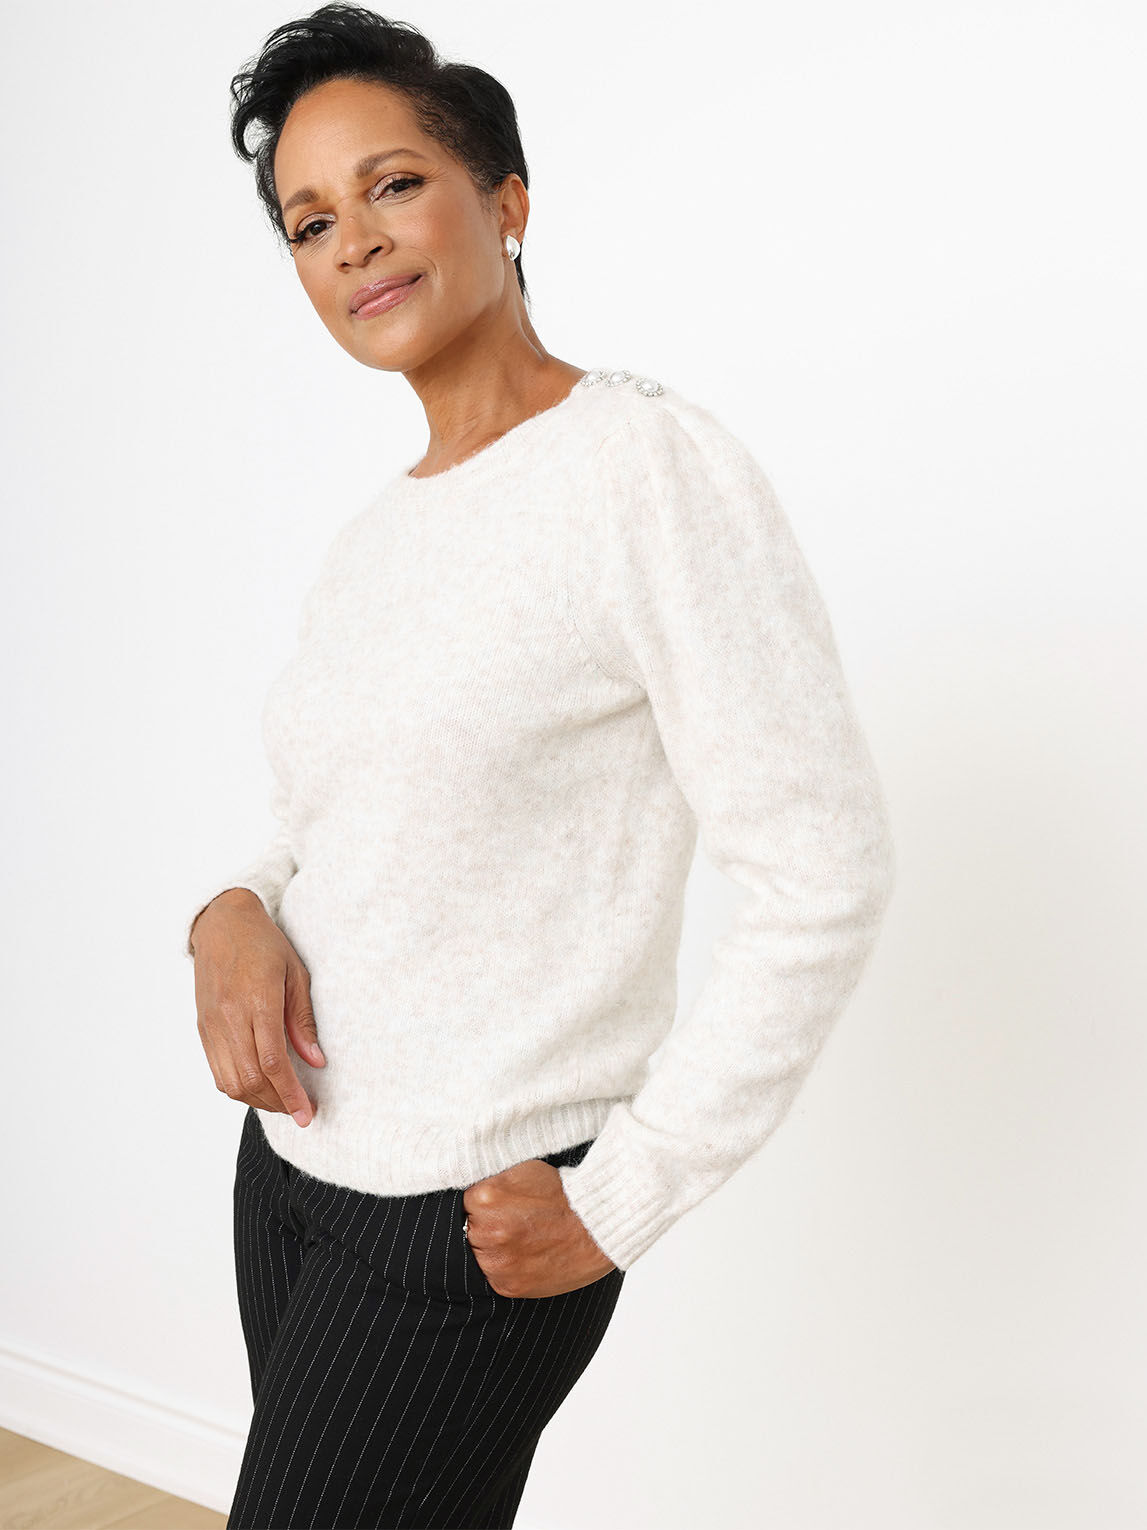 Button-Shoulder Pullover Sweater